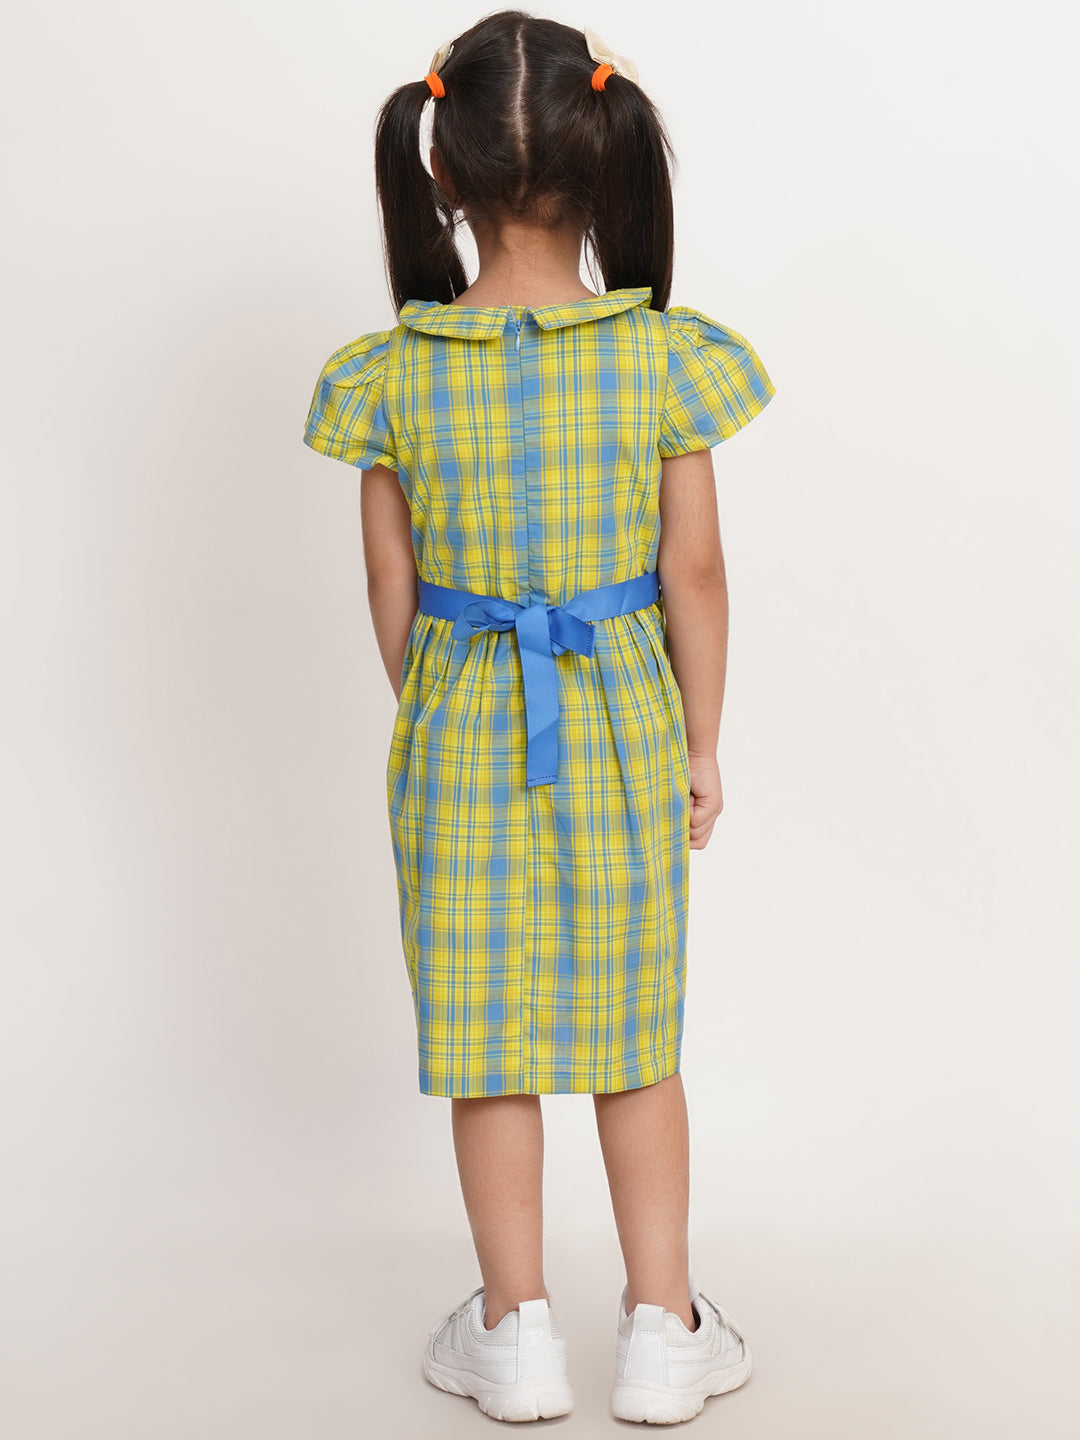 CREATIVE KID'S Girl Blue & Yellow Checked A-Line Dress